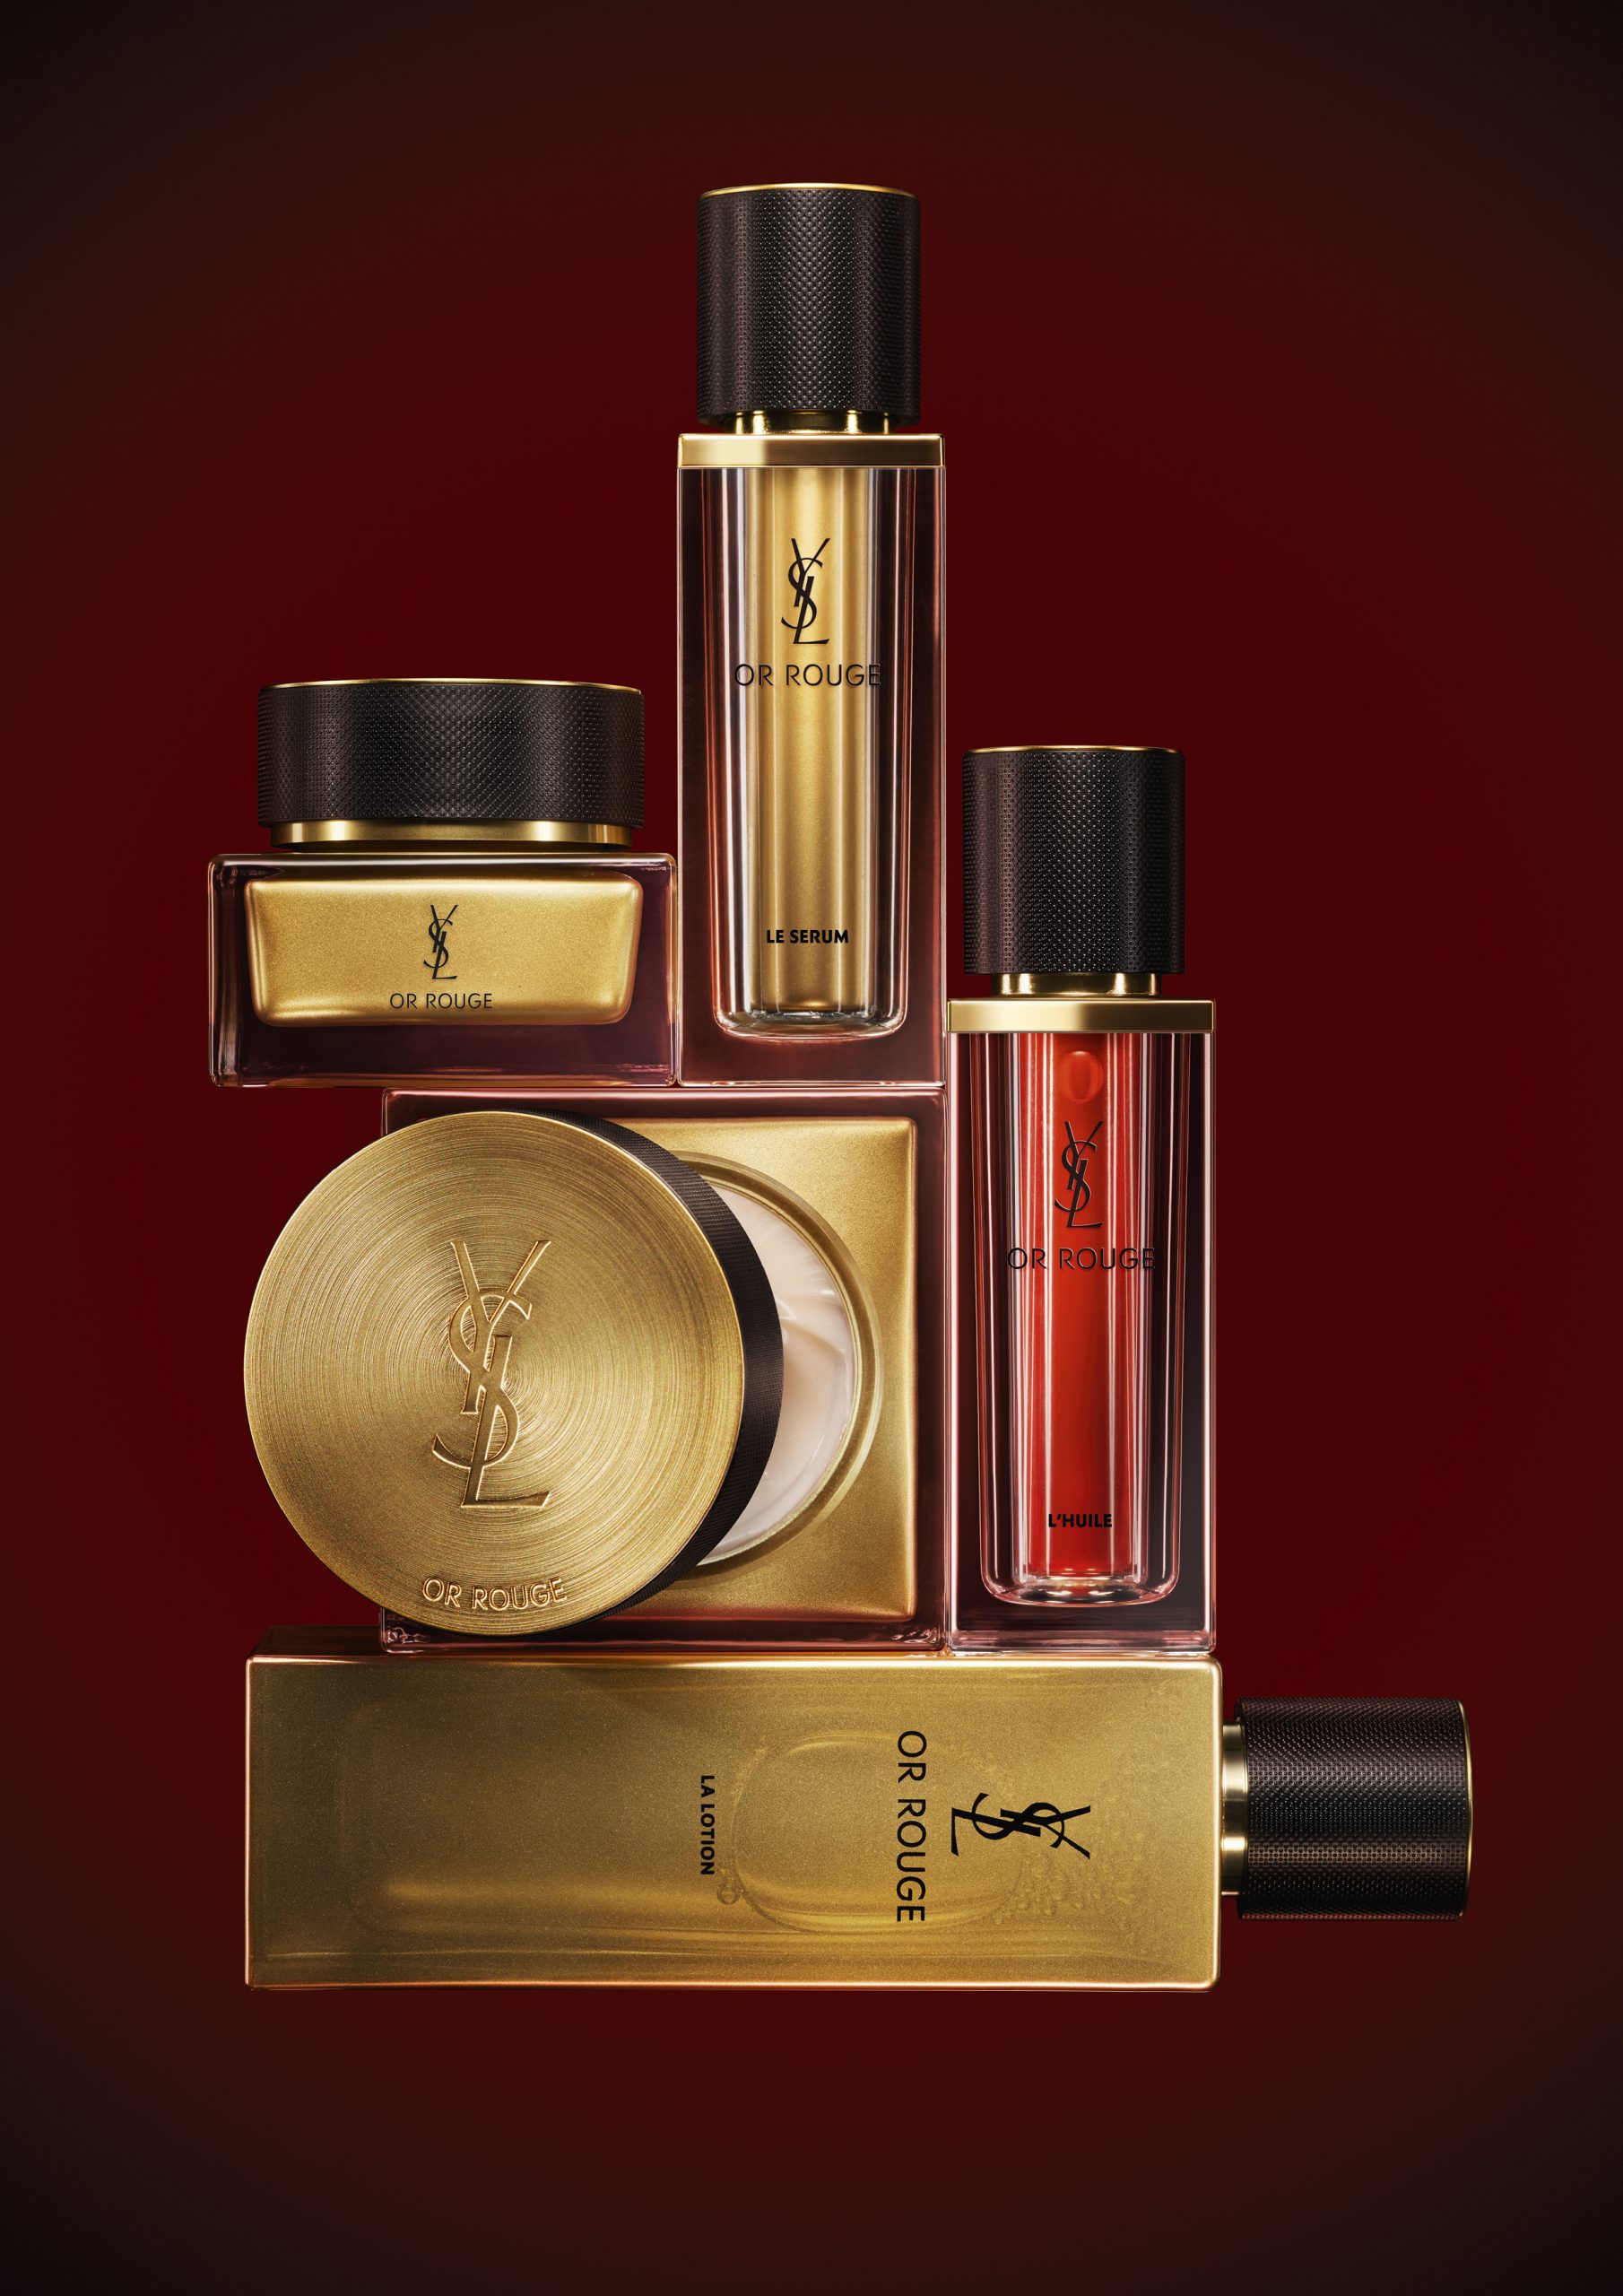 ysl-or-rouge_mood-pic-(4)